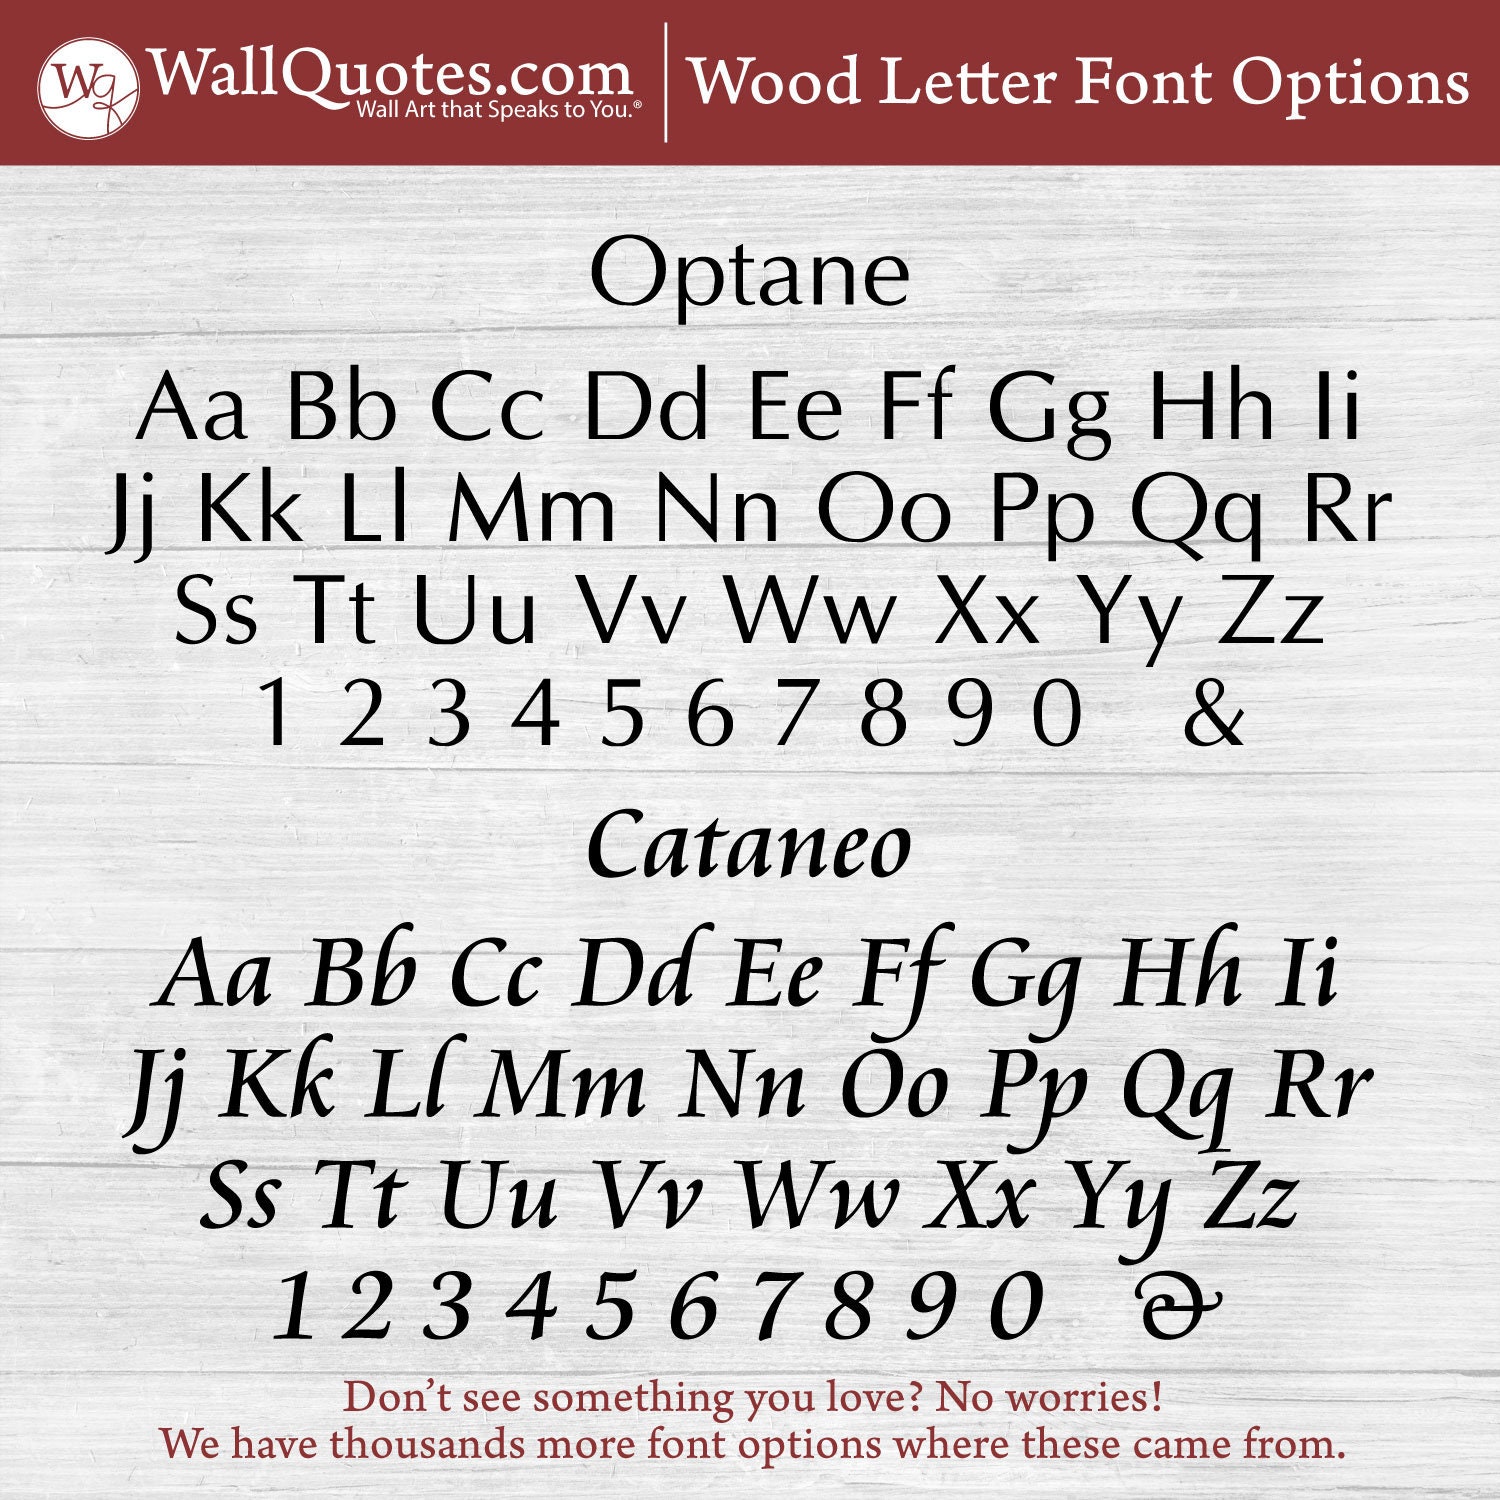 WOODEN MDF LETTERS & NUMBERS IN CALLIGRAPHY FONT SIZES 2-3-4-5-6-8 AND 10cm 